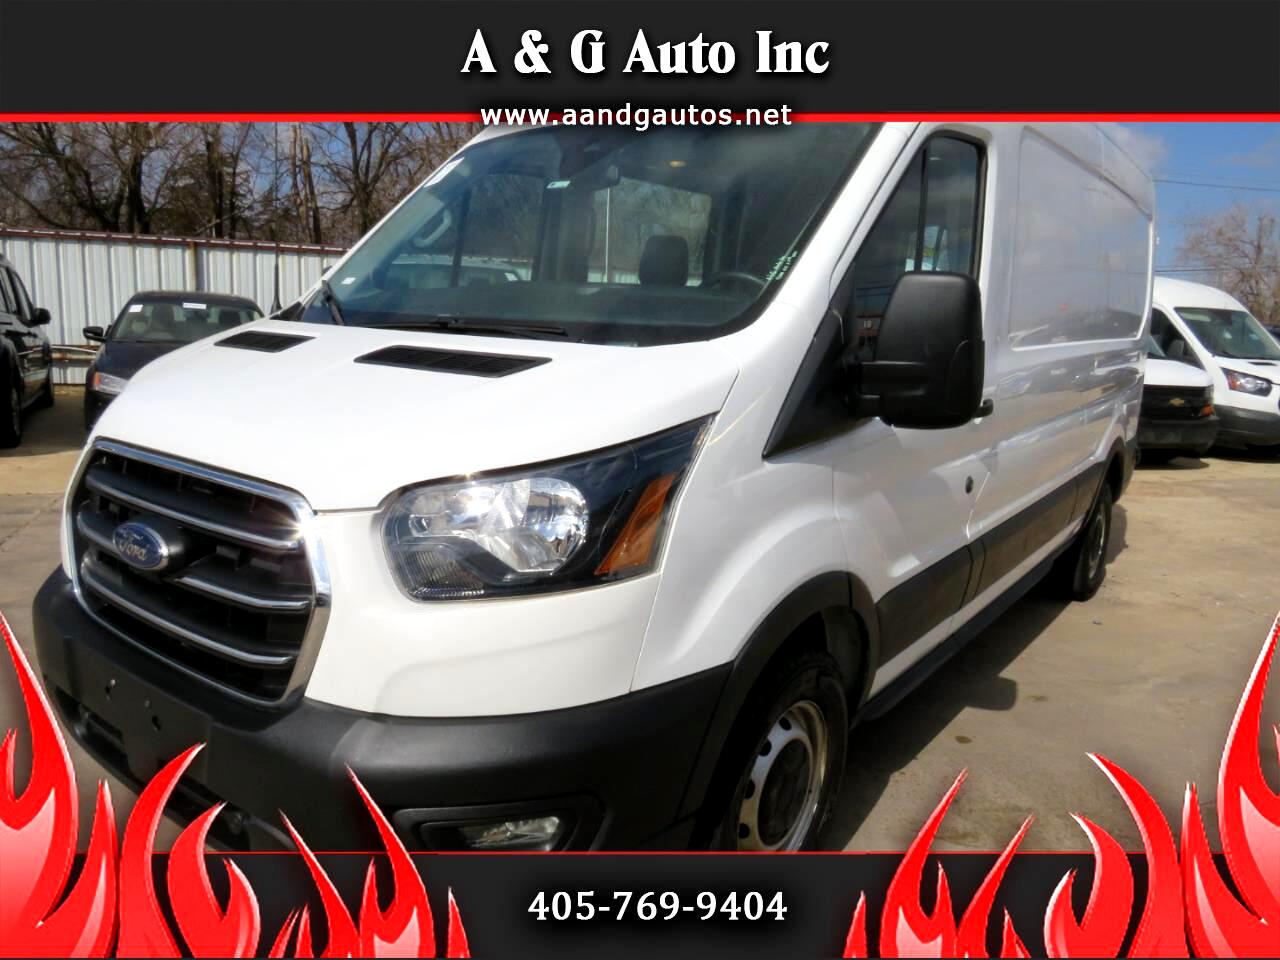 2020 Ford Transit for sale in Oklahoma City OK 73141 by A & G Auto Inc